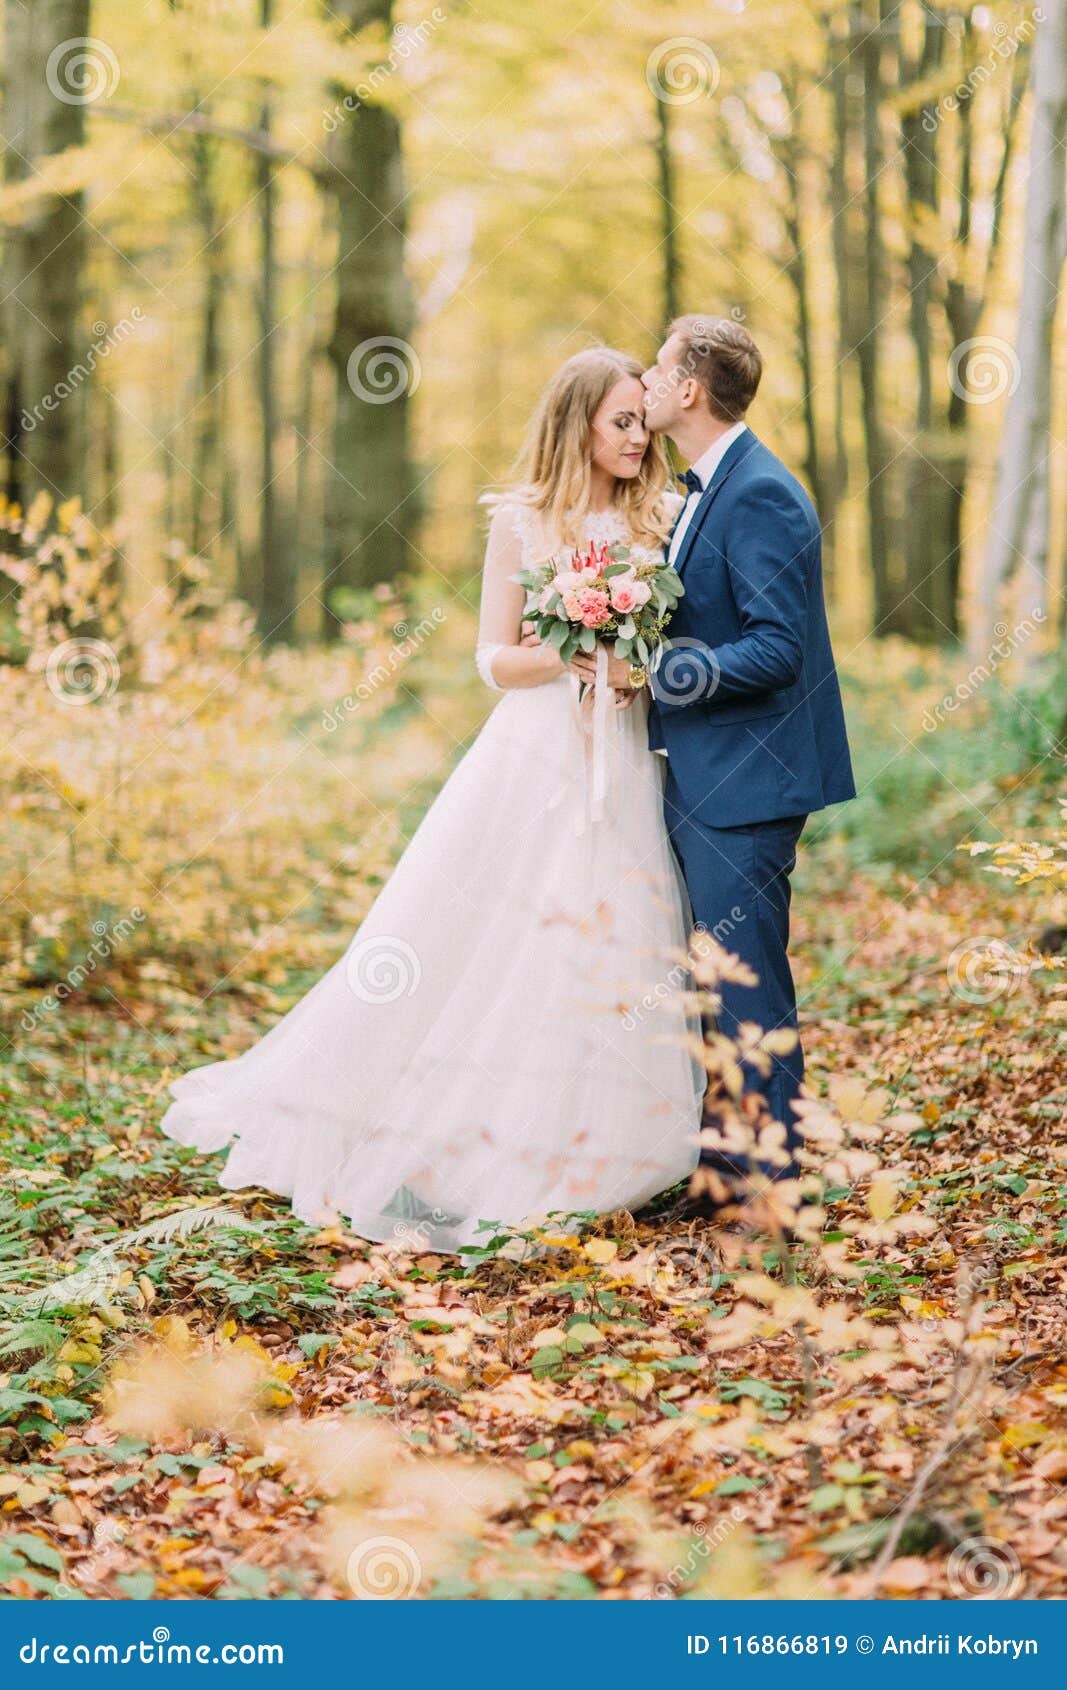 Full Length Photo Of The Groom Kissing The Bride In The